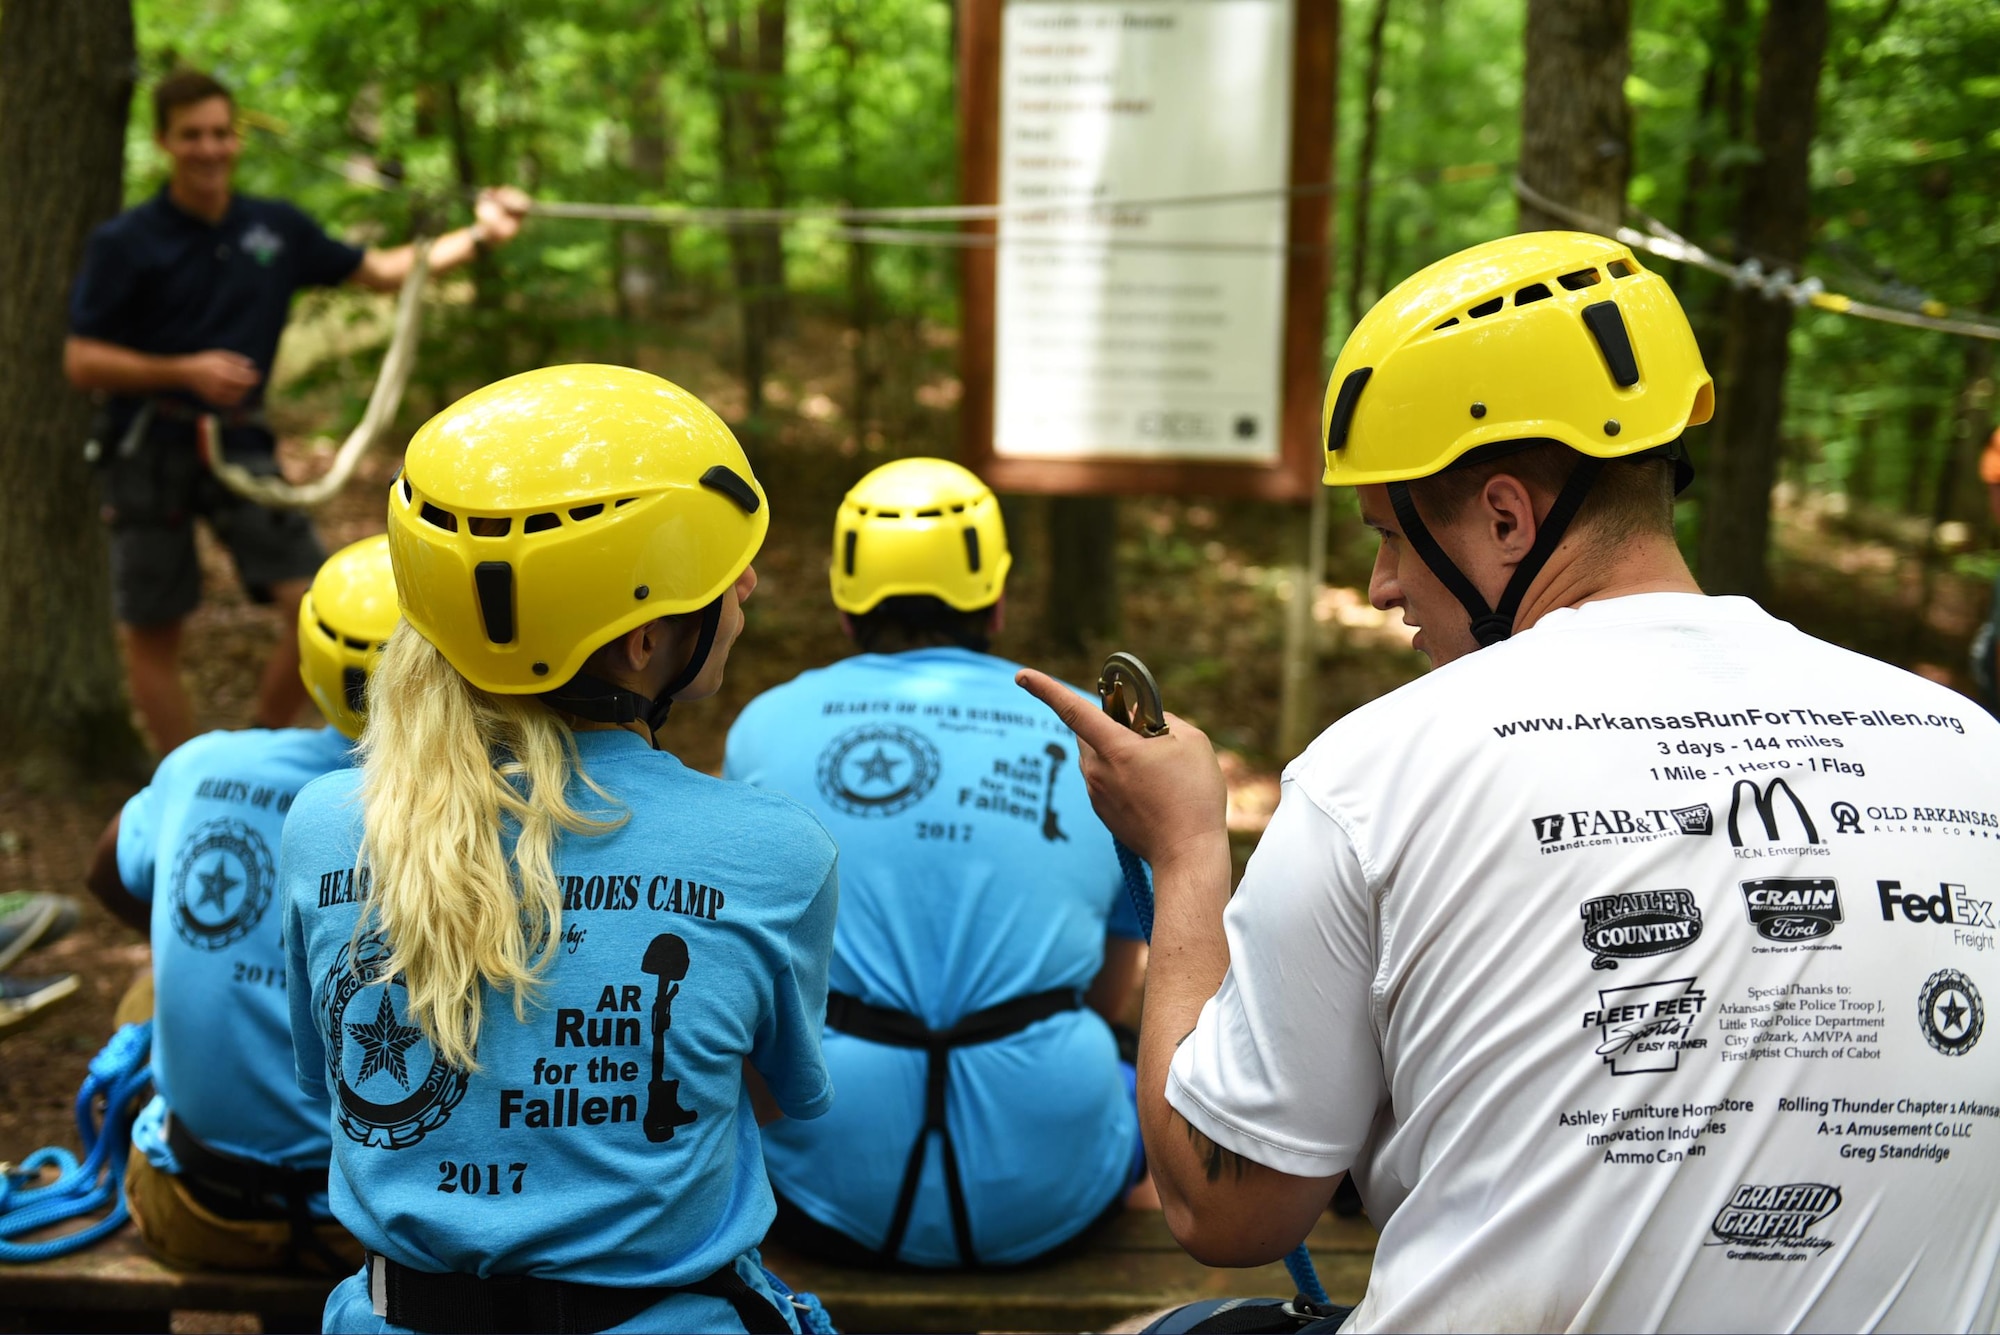 Ariana Ramirez, a Gold Star daughter, and Staff Sgt. Christian Chessor, 19th Security Forces Squadron Pass and Registration NCO in charge, recite zip line safety rules to each other June 15, 2017, at the Hearts of Our Heroes Camp in Little Rock, Ark. The Gold Star program’s mission is to serve families of fallen service members by providing resources that promote resiliency and keeping the families connected to the military as long as they desire. (U.S. Air Force photo by Airman 1st Class Kevin Sommer Giron)